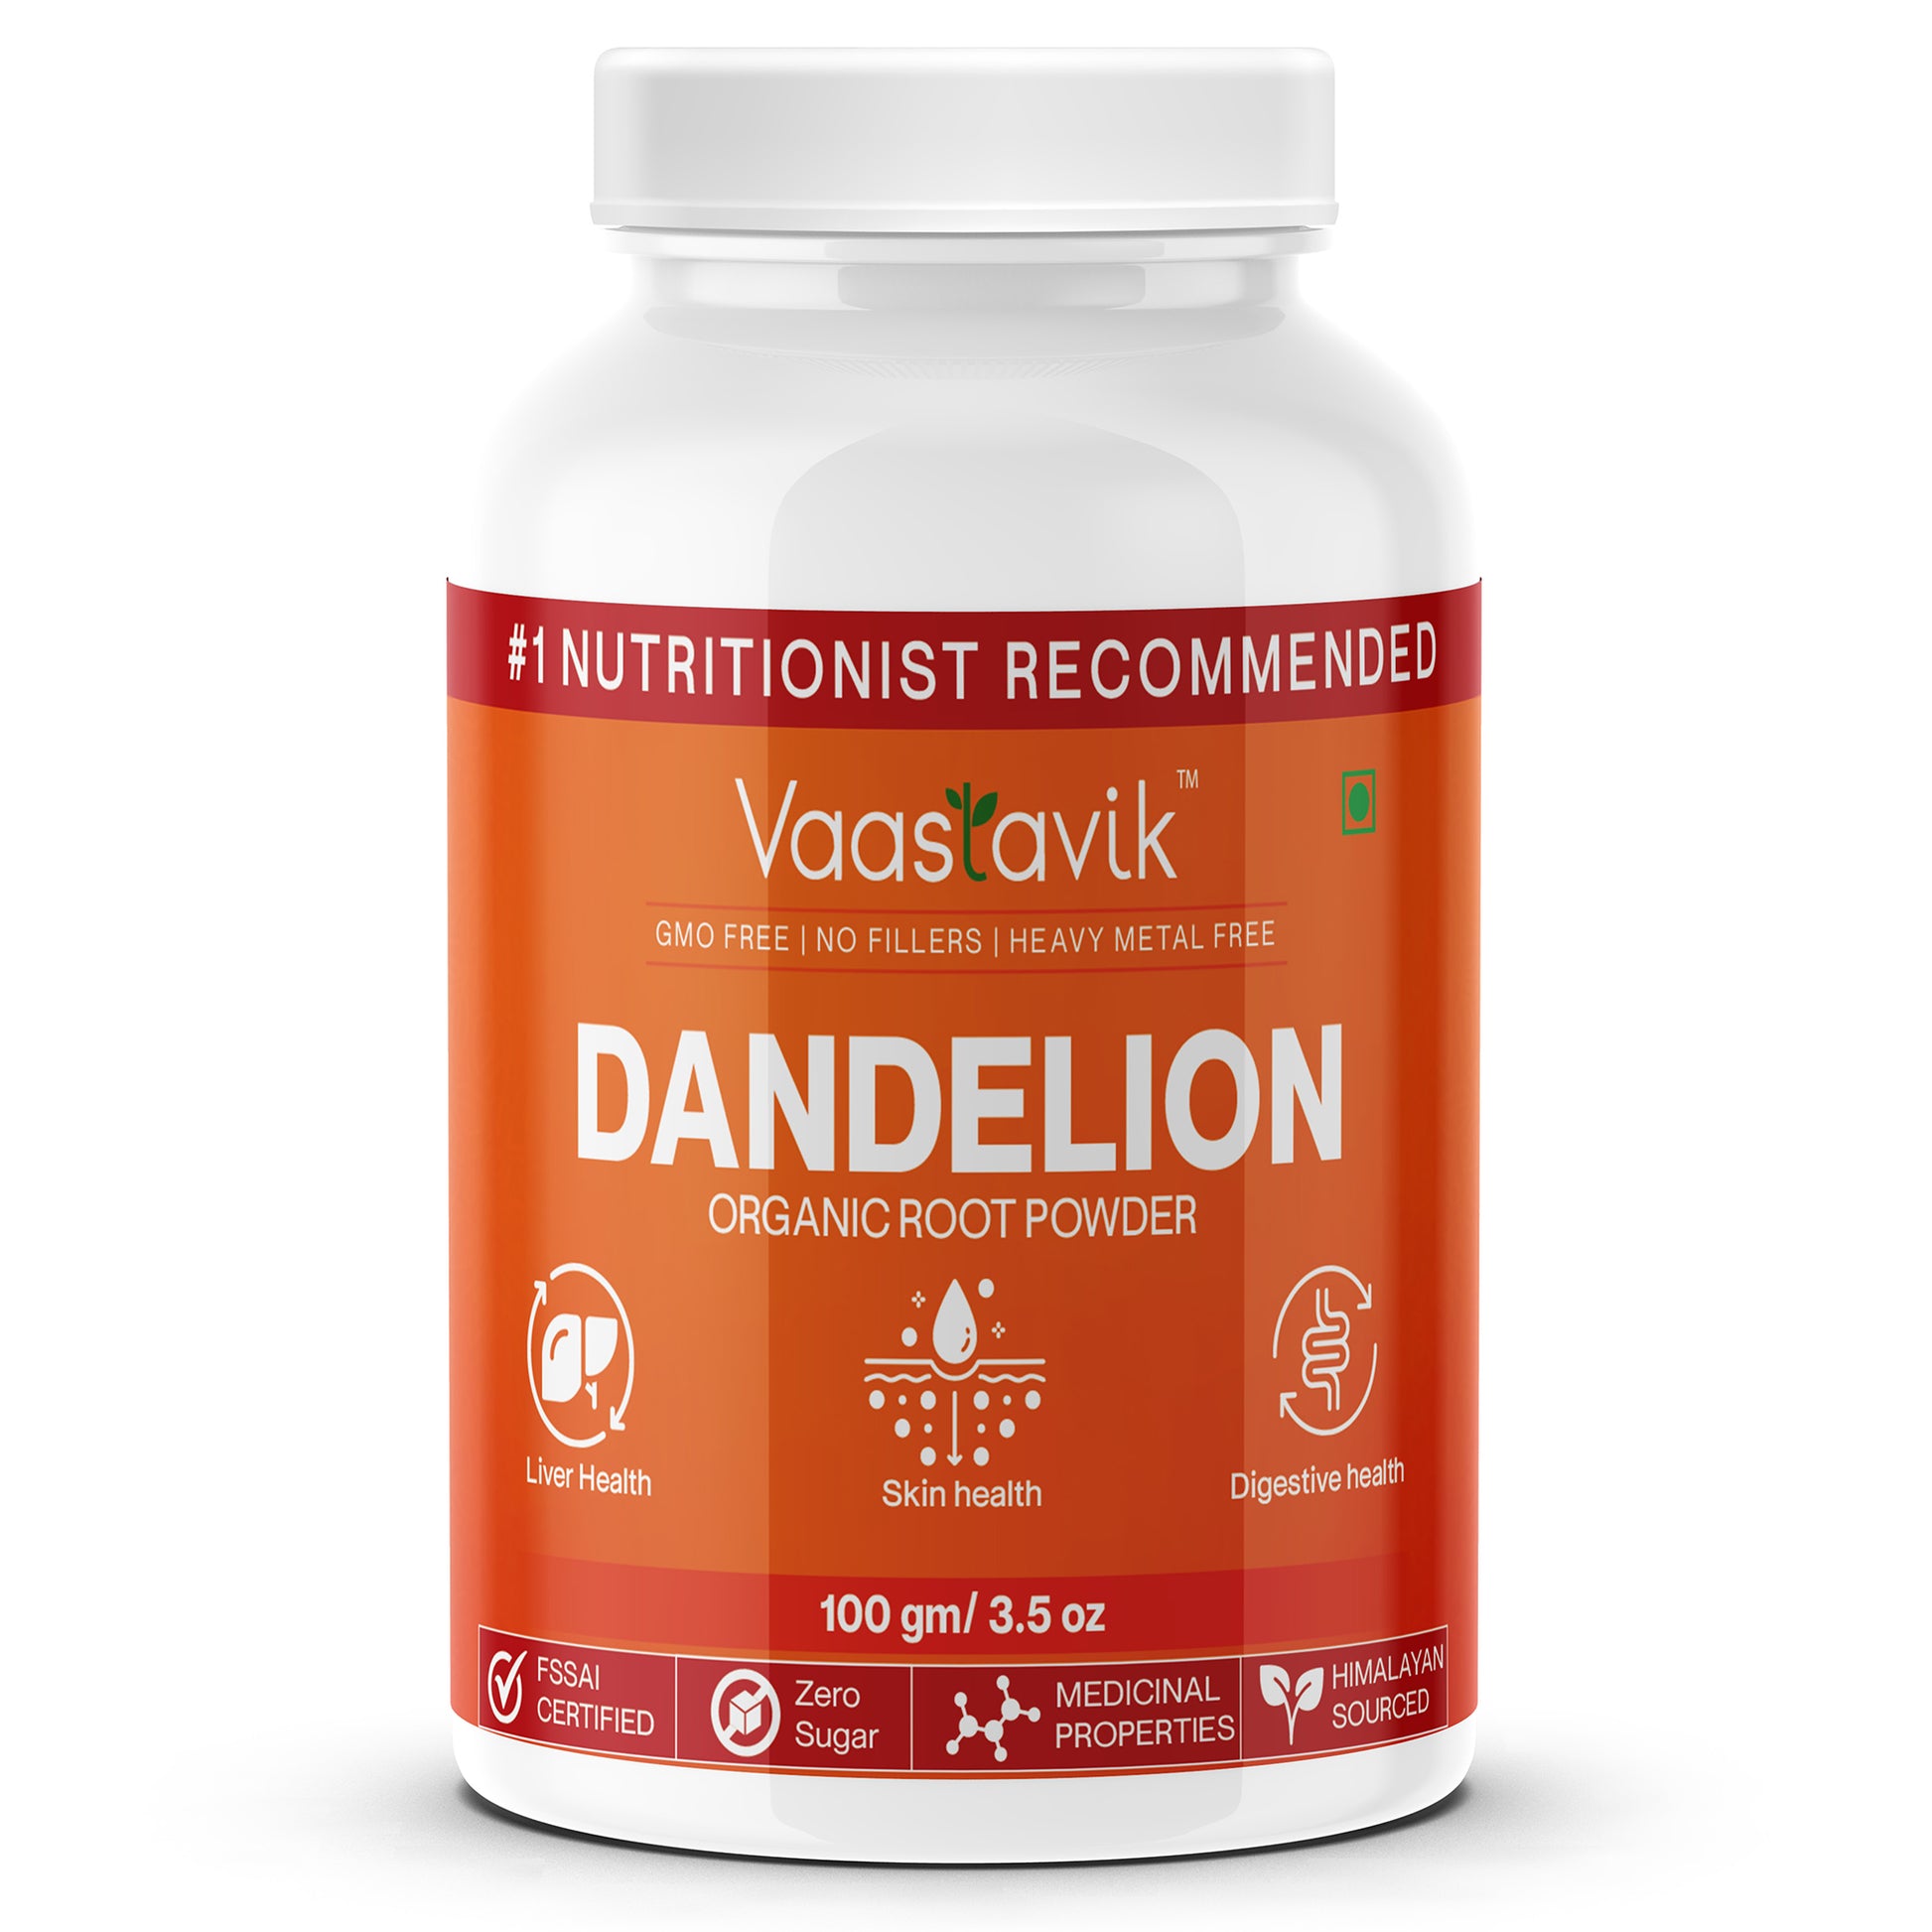 Pure  Best  Organic  Natural Buy now Shop sale Online Price bulk Manufacturer  Wholesaler  reviews ratings specifications Free Shipping Cash on delivery India supplement Tea dandelion Root Powder